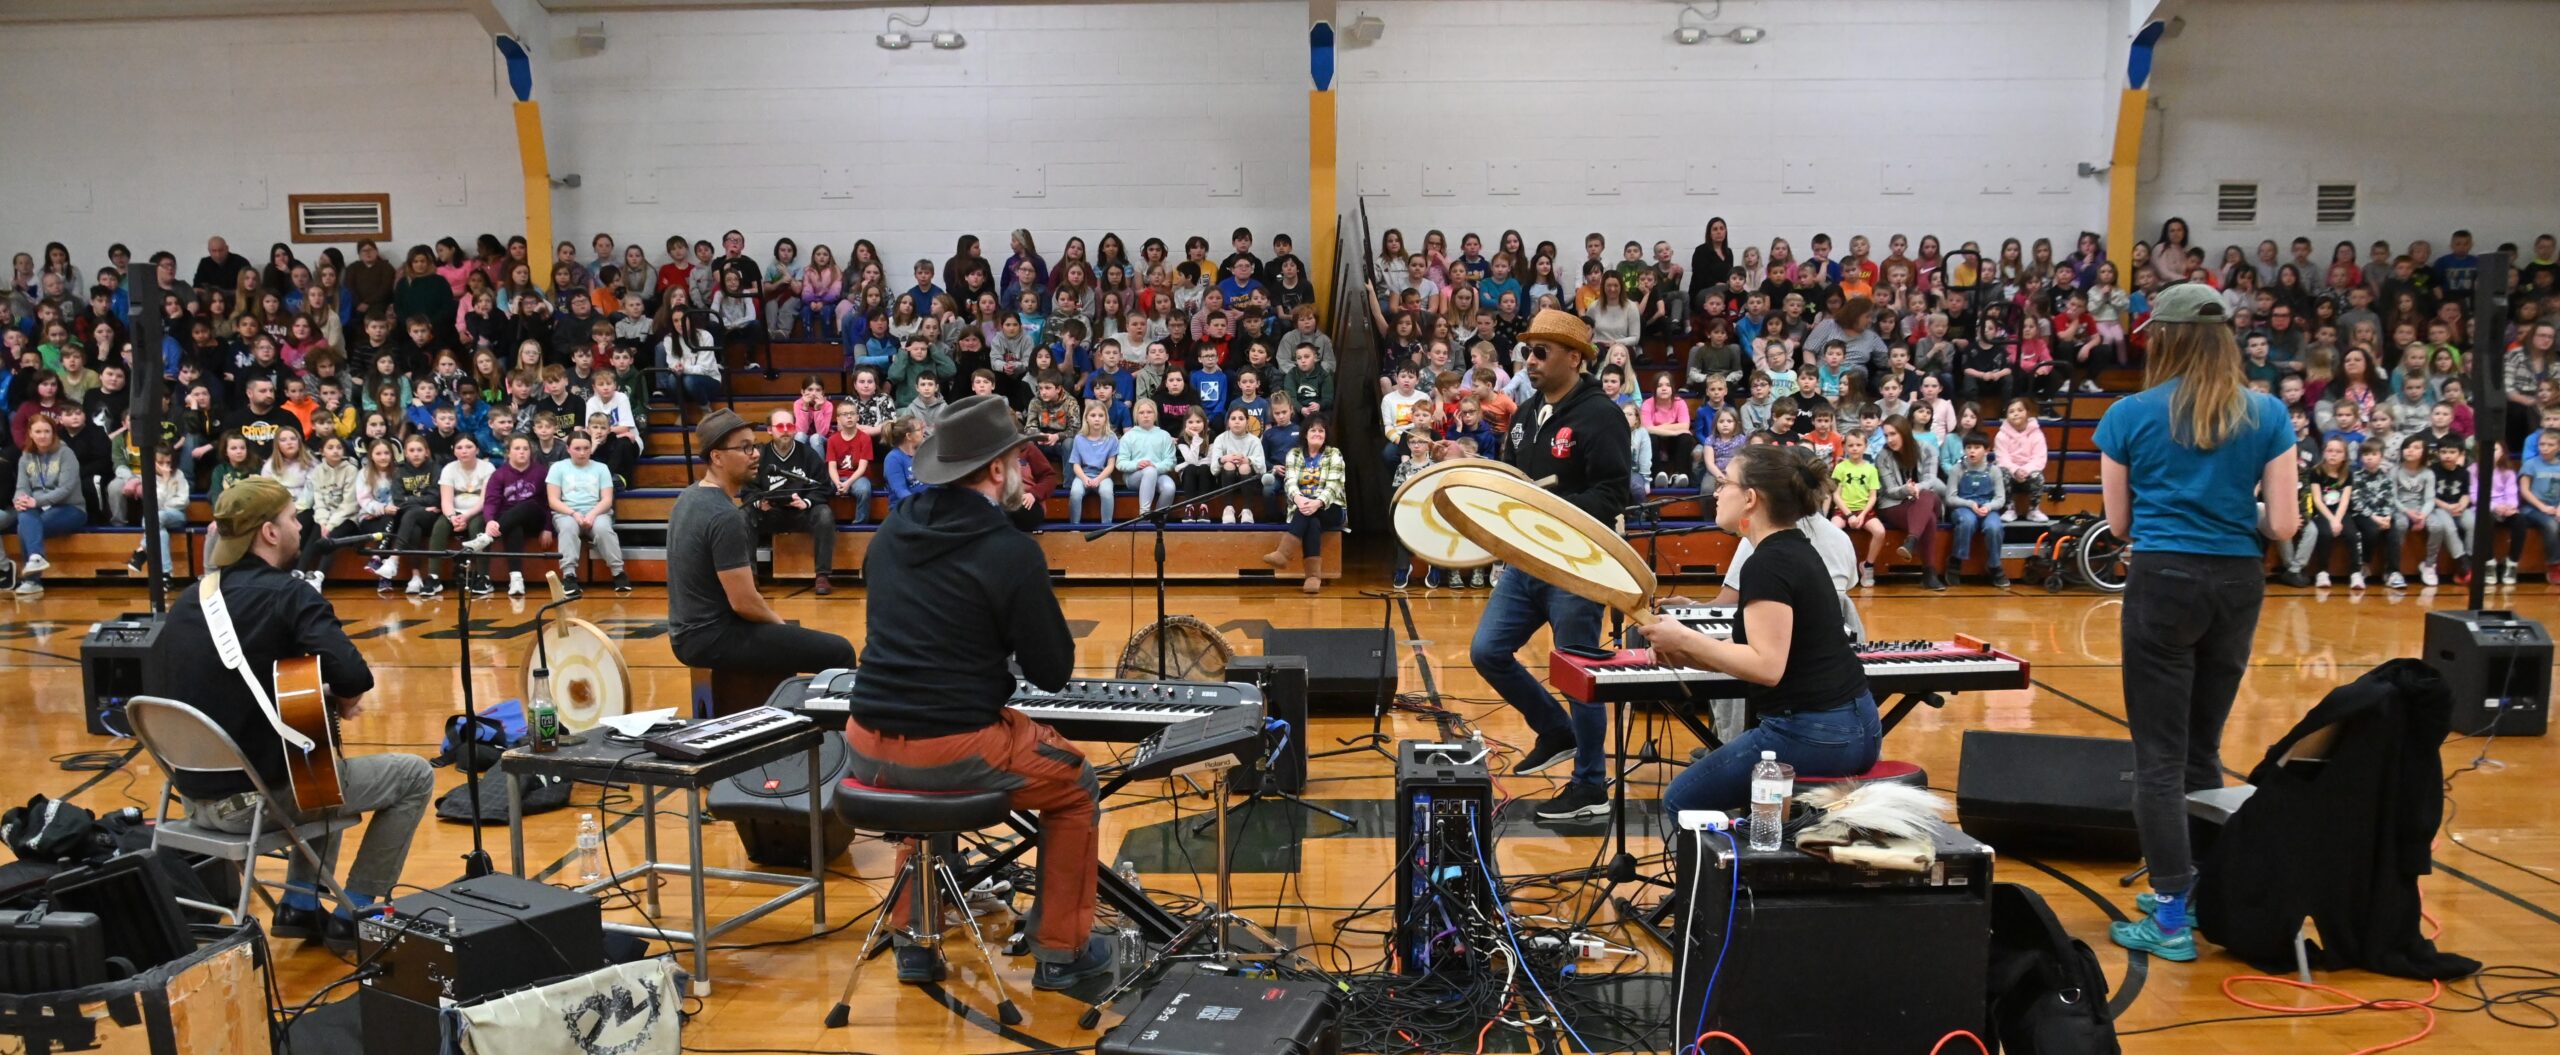 A musical group performs in front of an audience full of students on bleachers.